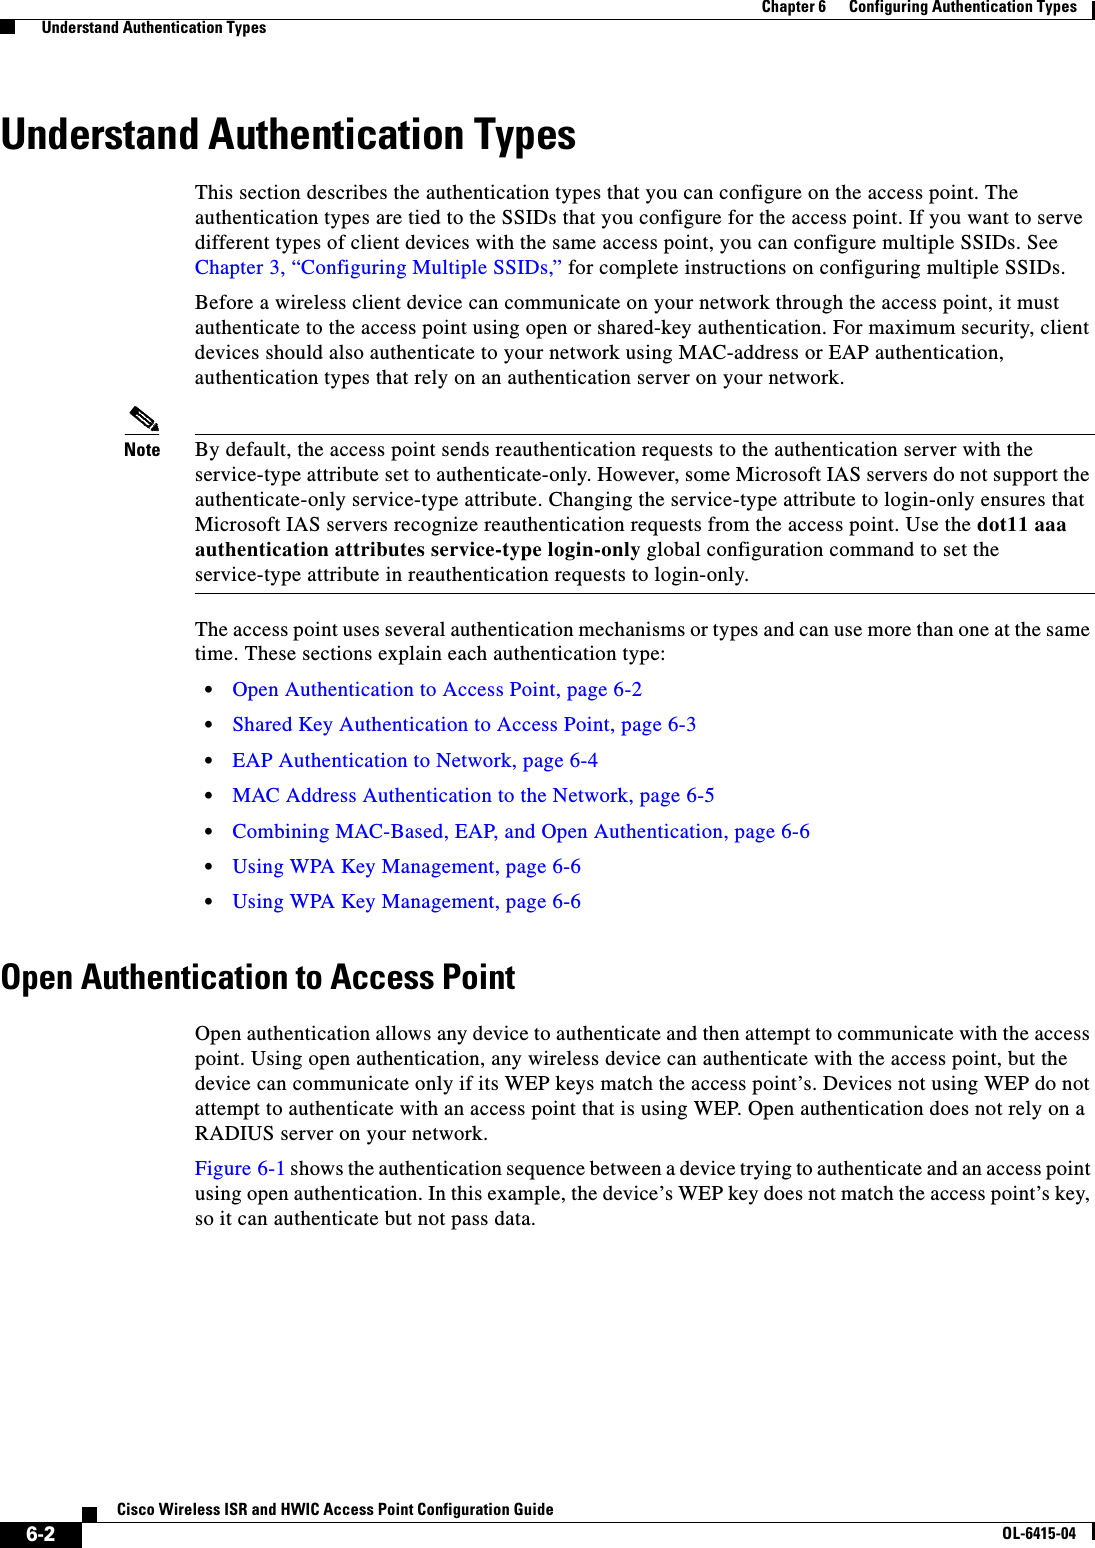 6-2Cisco Wireless ISR and HWIC Access Point Configuration GuideOL-6415-04Chapter 6      Configuring Authentication Types  Understand Authentication TypesUnderstand Authentication TypesThis section describes the authentication types that you can configure on the access point. The authentication types are tied to the SSIDs that you configure for the access point. If you want to serve different types of client devices with the same access point, you can configure multiple SSIDs. See Chapter 3, “Configuring Multiple SSIDs,” for complete instructions on configuring multiple SSIDs.Before a wireless client device can communicate on your network through the access point, it must authenticate to the access point using open or shared-key authentication. For maximum security, client devices should also authenticate to your network using MAC-address or EAP authentication, authentication types that rely on an authentication server on your network.Note By default, the access point sends reauthentication requests to the authentication server with the service-type attribute set to authenticate-only. However, some Microsoft IAS servers do not support the authenticate-only service-type attribute. Changing the service-type attribute to login-only ensures that Microsoft IAS servers recognize reauthentication requests from the access point. Use the dot11 aaa authentication attributes service-type login-only global configuration command to set the service-type attribute in reauthentication requests to login-only.The access point uses several authentication mechanisms or types and can use more than one at the same time. These sections explain each authentication type:  • Open Authentication to Access Point, page 6-2  • Shared Key Authentication to Access Point, page 6-3  • EAP Authentication to Network, page 6-4  • MAC Address Authentication to the Network, page 6-5  • Combining MAC-Based, EAP, and Open Authentication, page 6-6  • Using WPA Key Management, page 6-6  • Using WPA Key Management, page 6-6Open Authentication to Access PointOpen authentication allows any device to authenticate and then attempt to communicate with the access point. Using open authentication, any wireless device can authenticate with the access point, but the device can communicate only if its WEP keys match the access point’s. Devices not using WEP do not attempt to authenticate with an access point that is using WEP. Open authentication does not rely on a RADIUS server on your network. Figure 6-1 shows the authentication sequence between a device trying to authenticate and an access point using open authentication. In this example, the device’s WEP key does not match the access point’s key, so it can authenticate but not pass data.